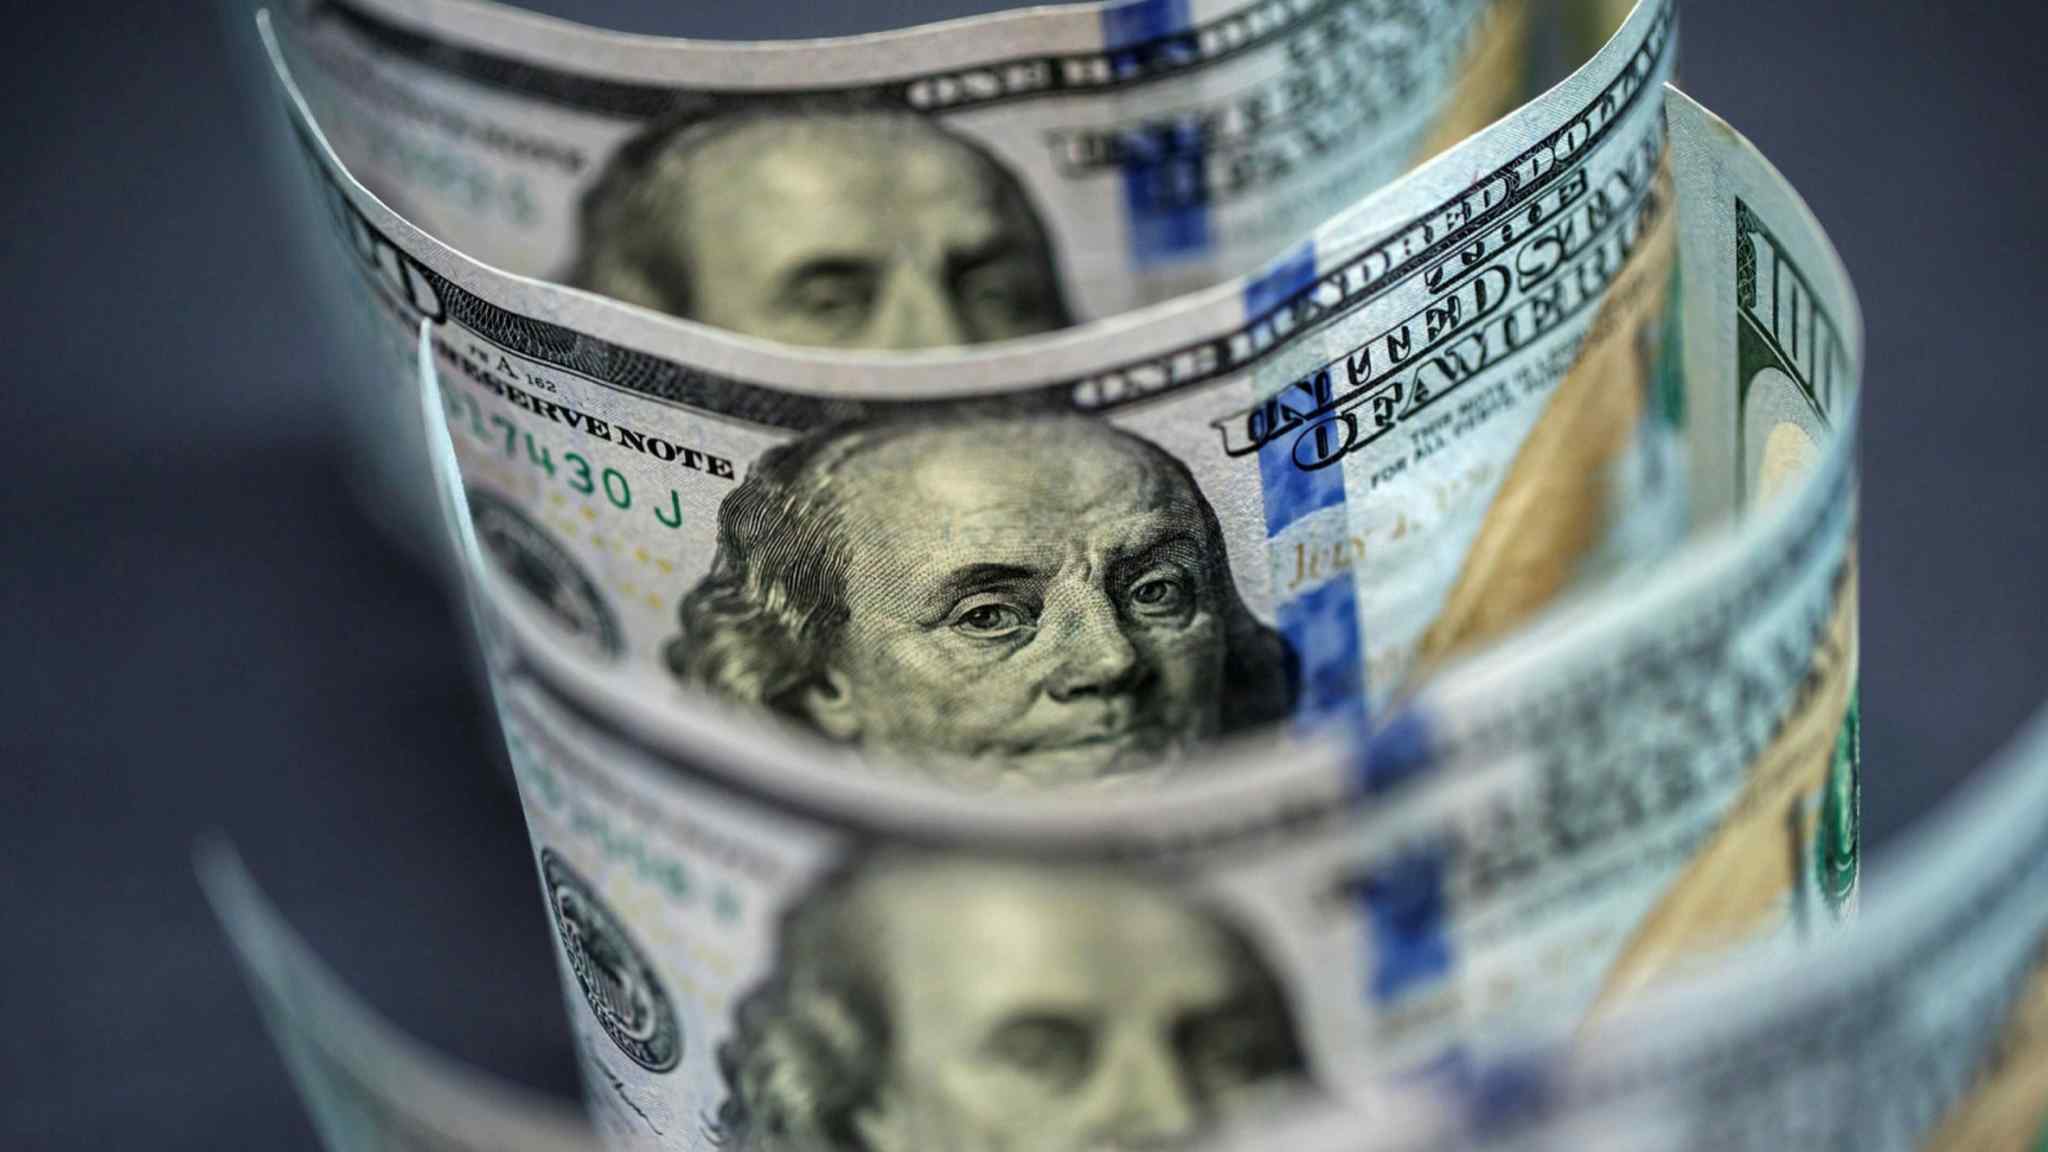 The dollar’s rapid rise increases risks for global economy